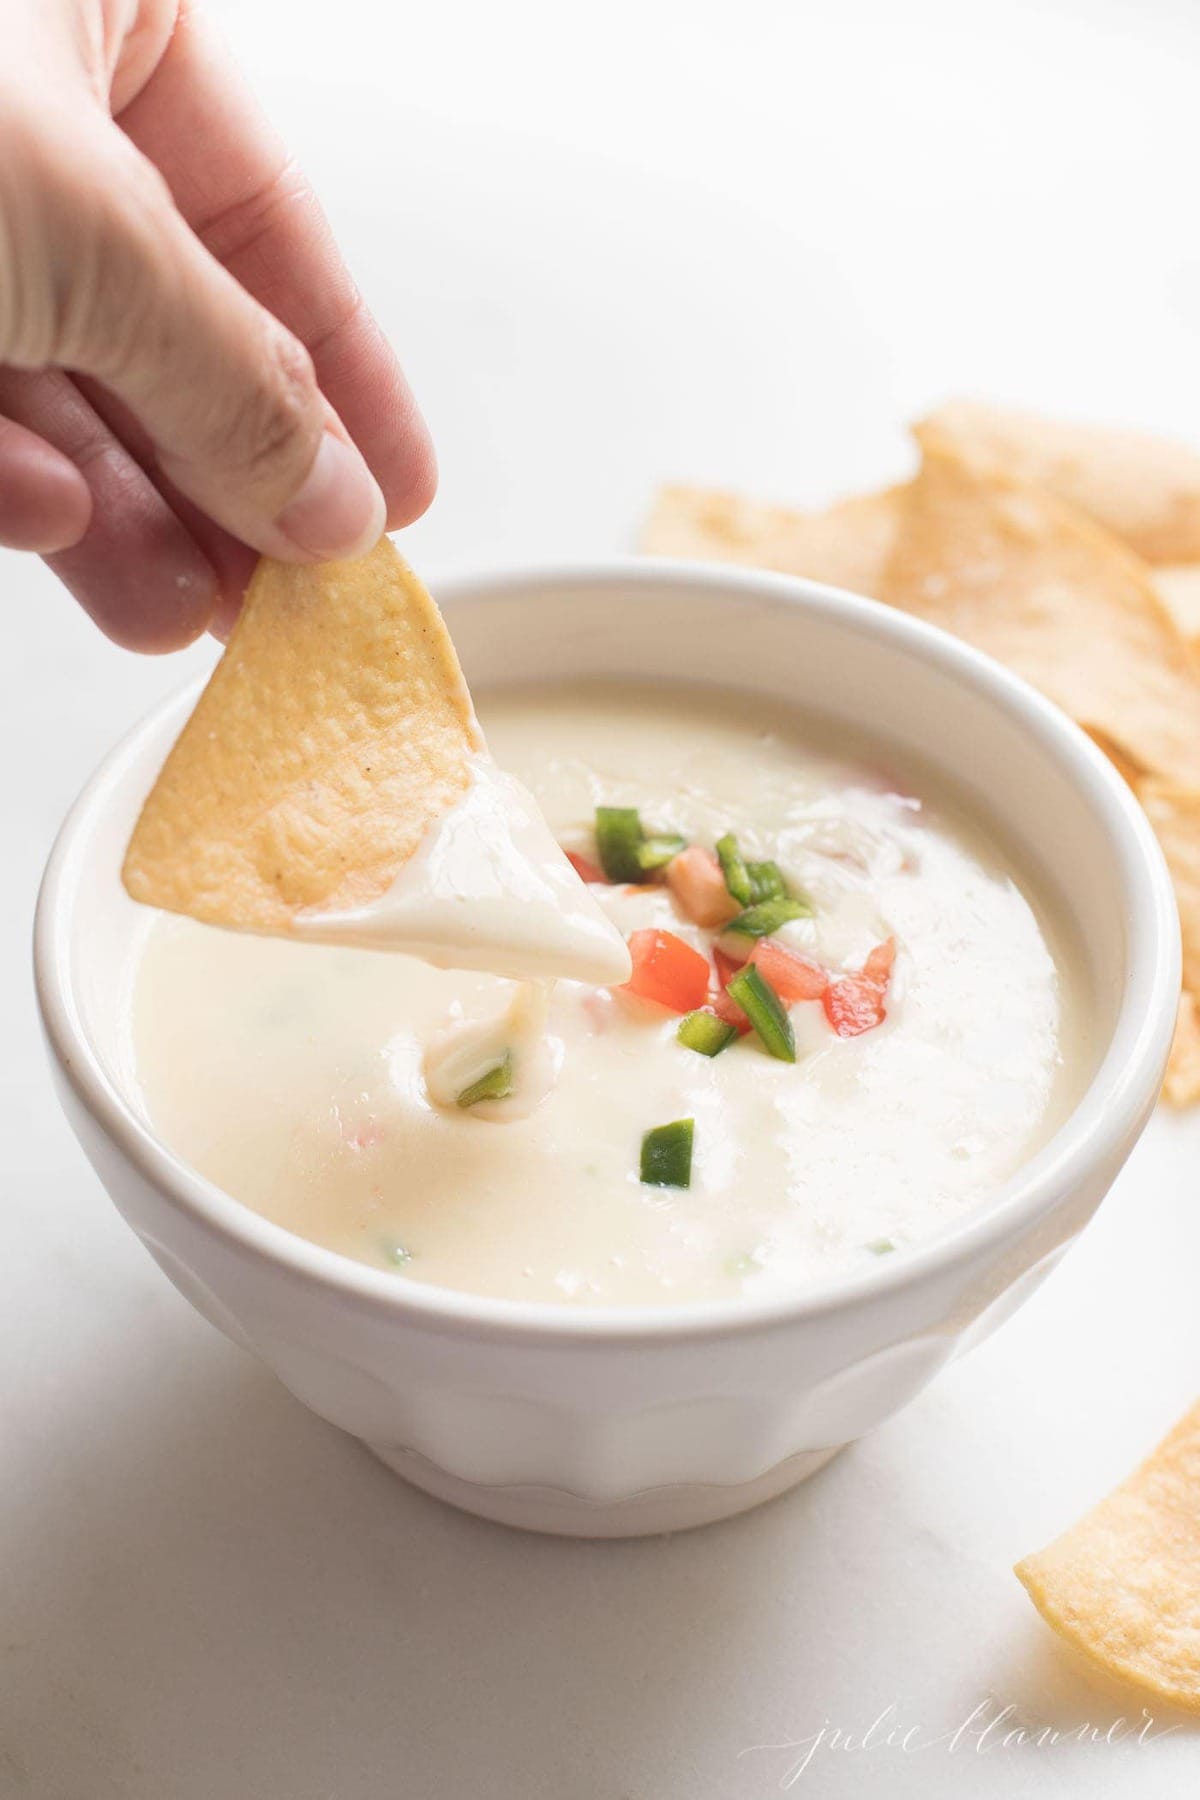 A hand reaching into a bowl of white queso with a tortilla chip, topped with pico de gallo